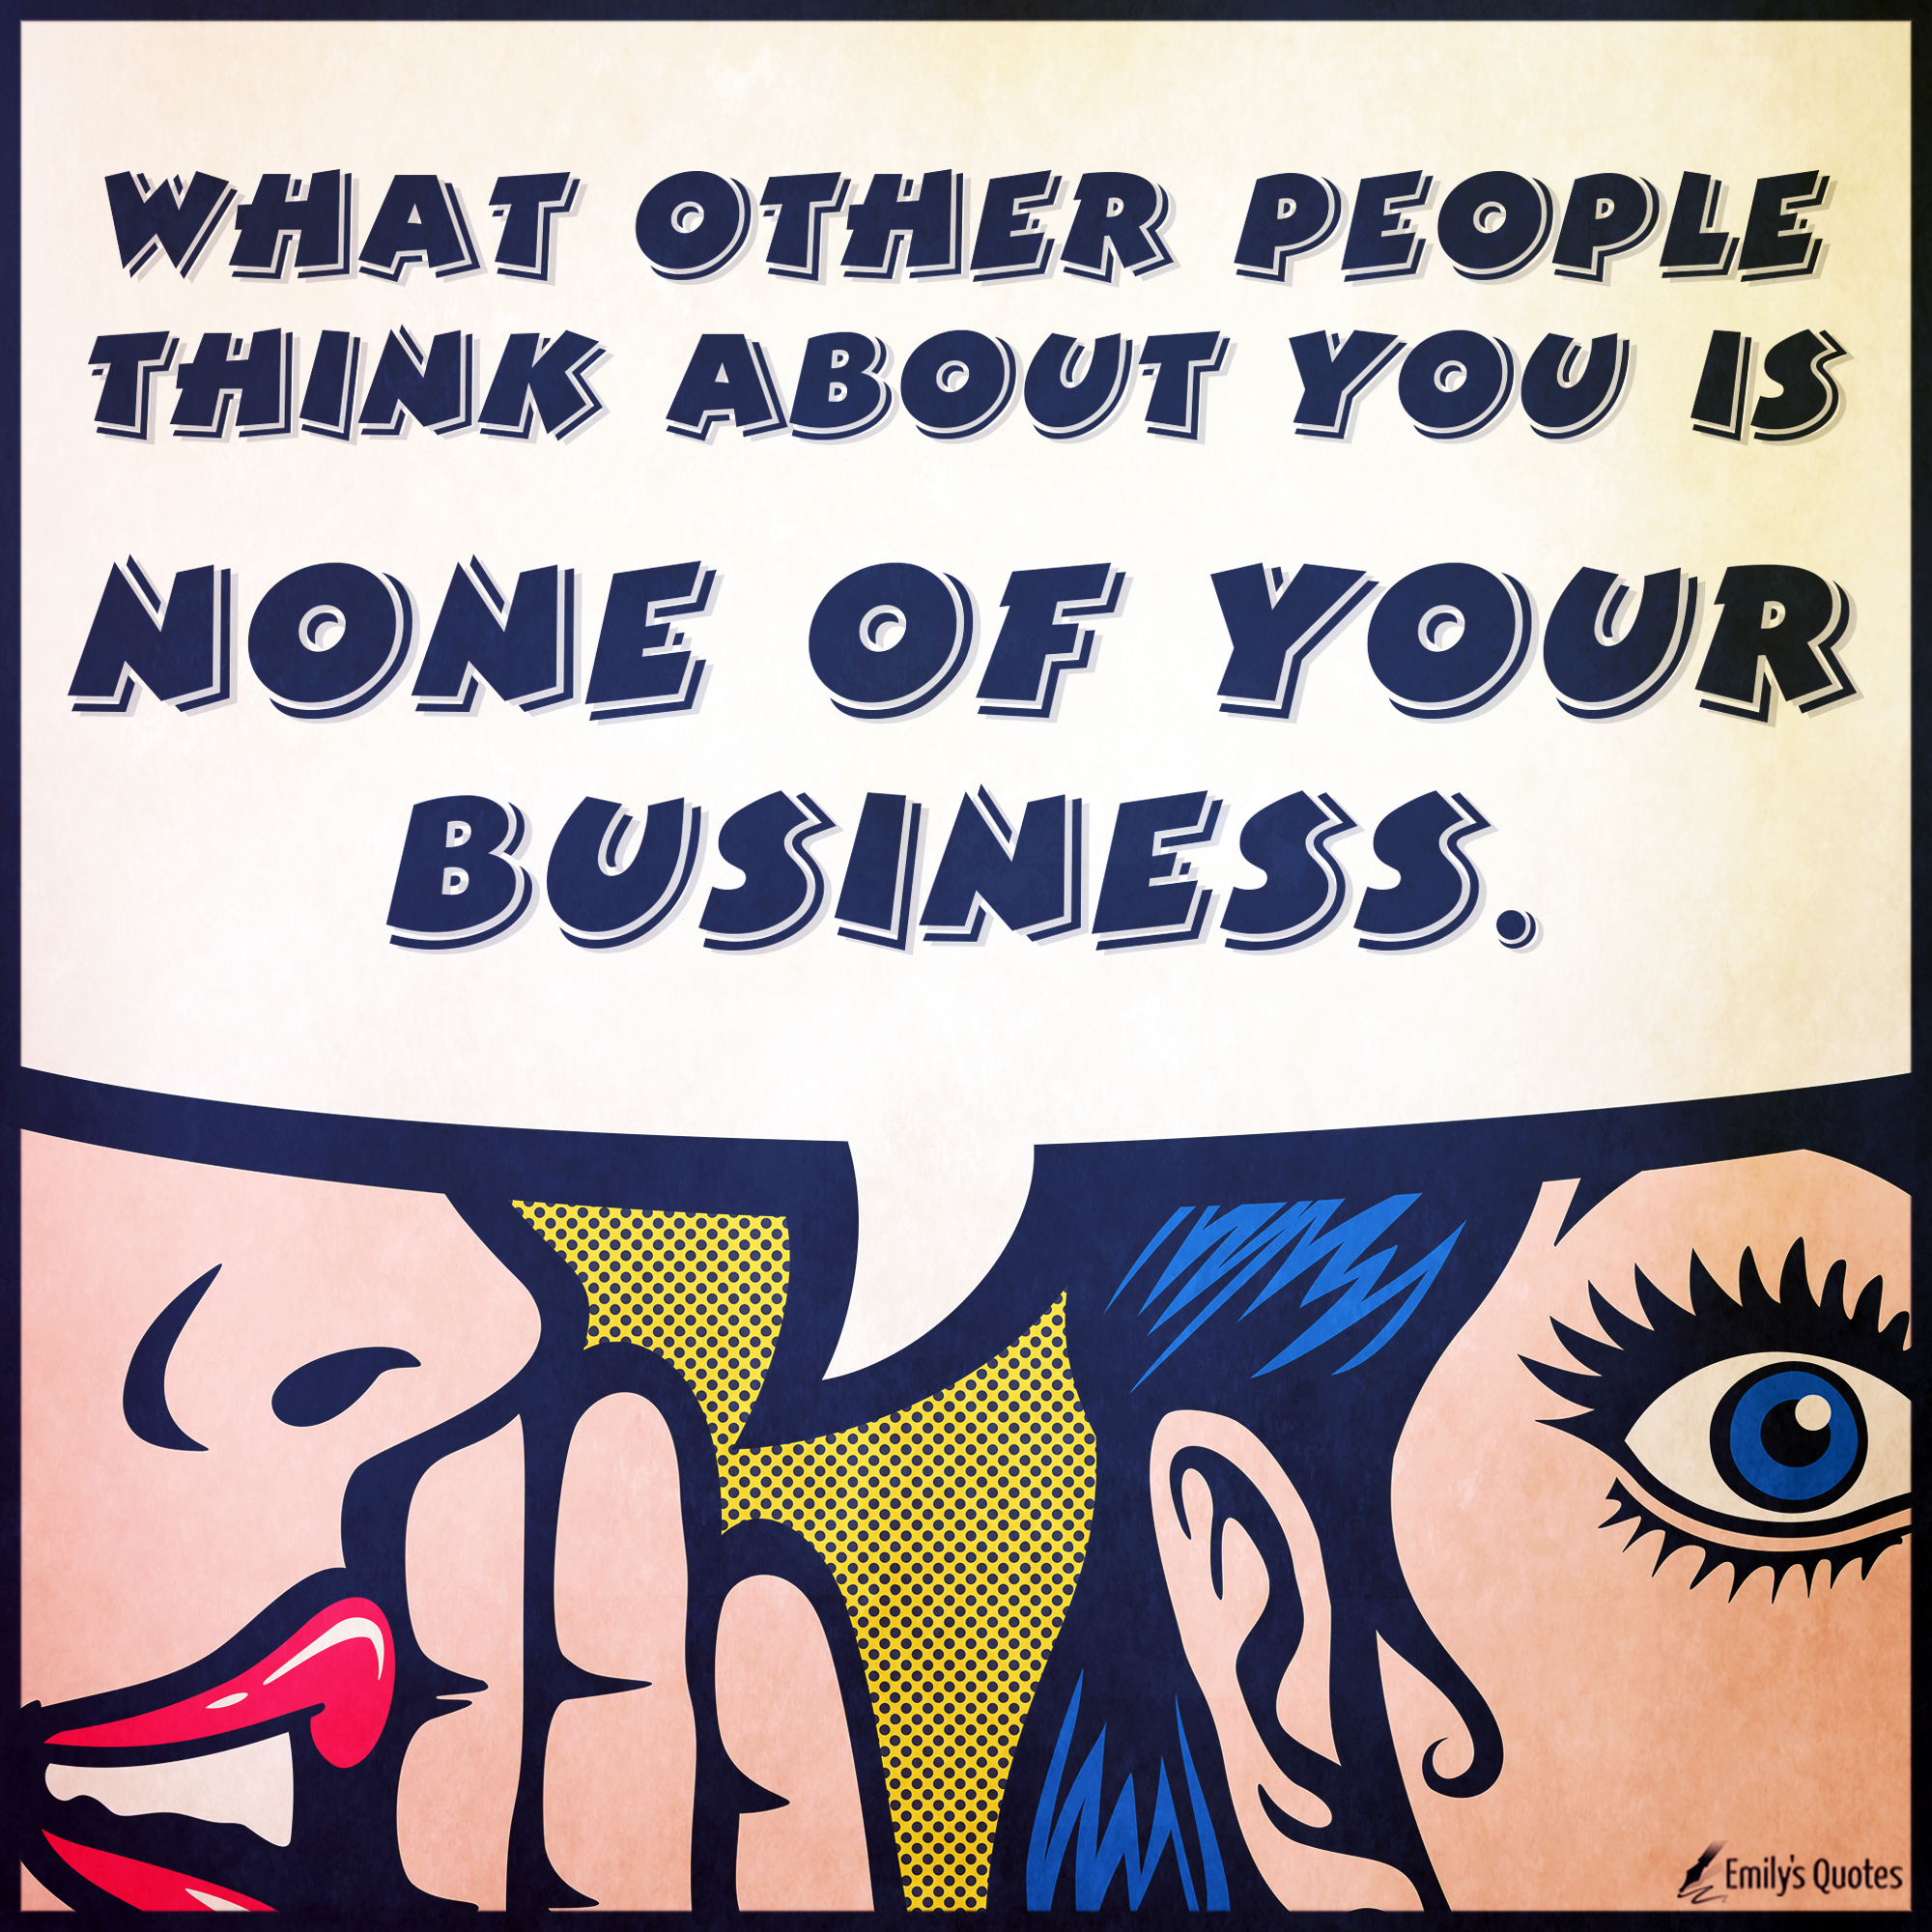 What other people think about you is none of your business